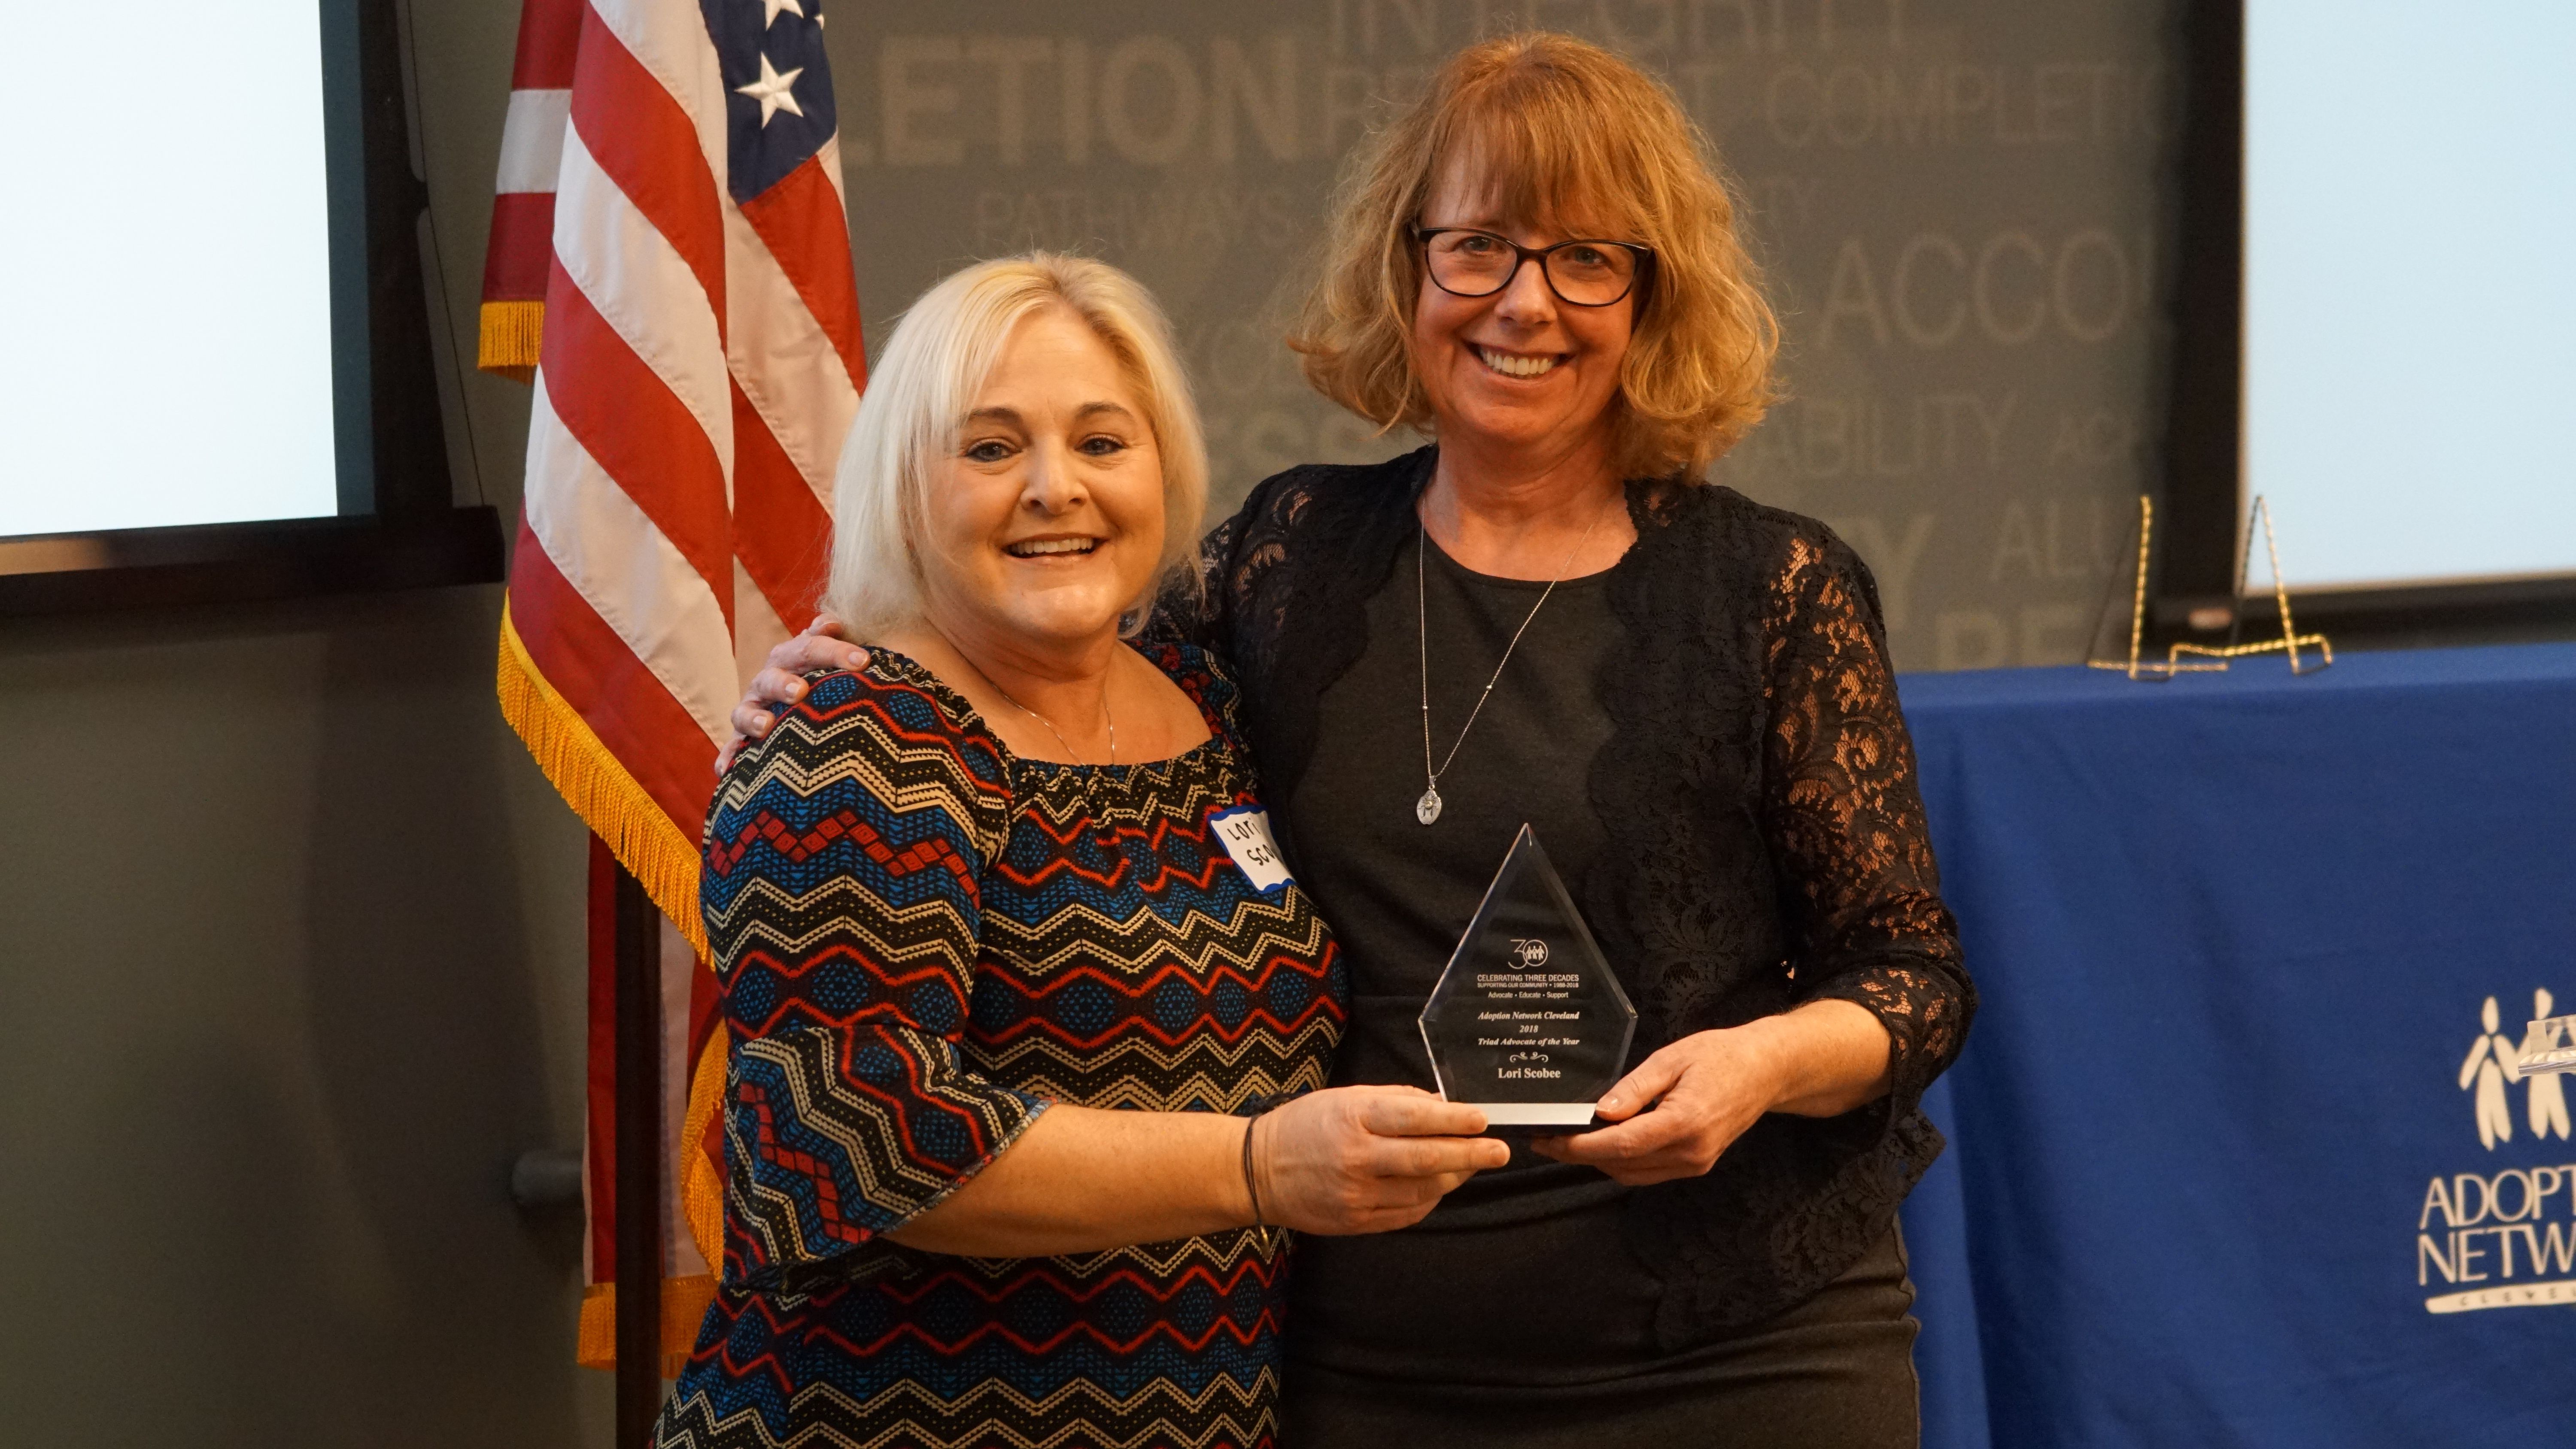 Ms. Lori Scobee Honored as a Triad Advocate of the Year